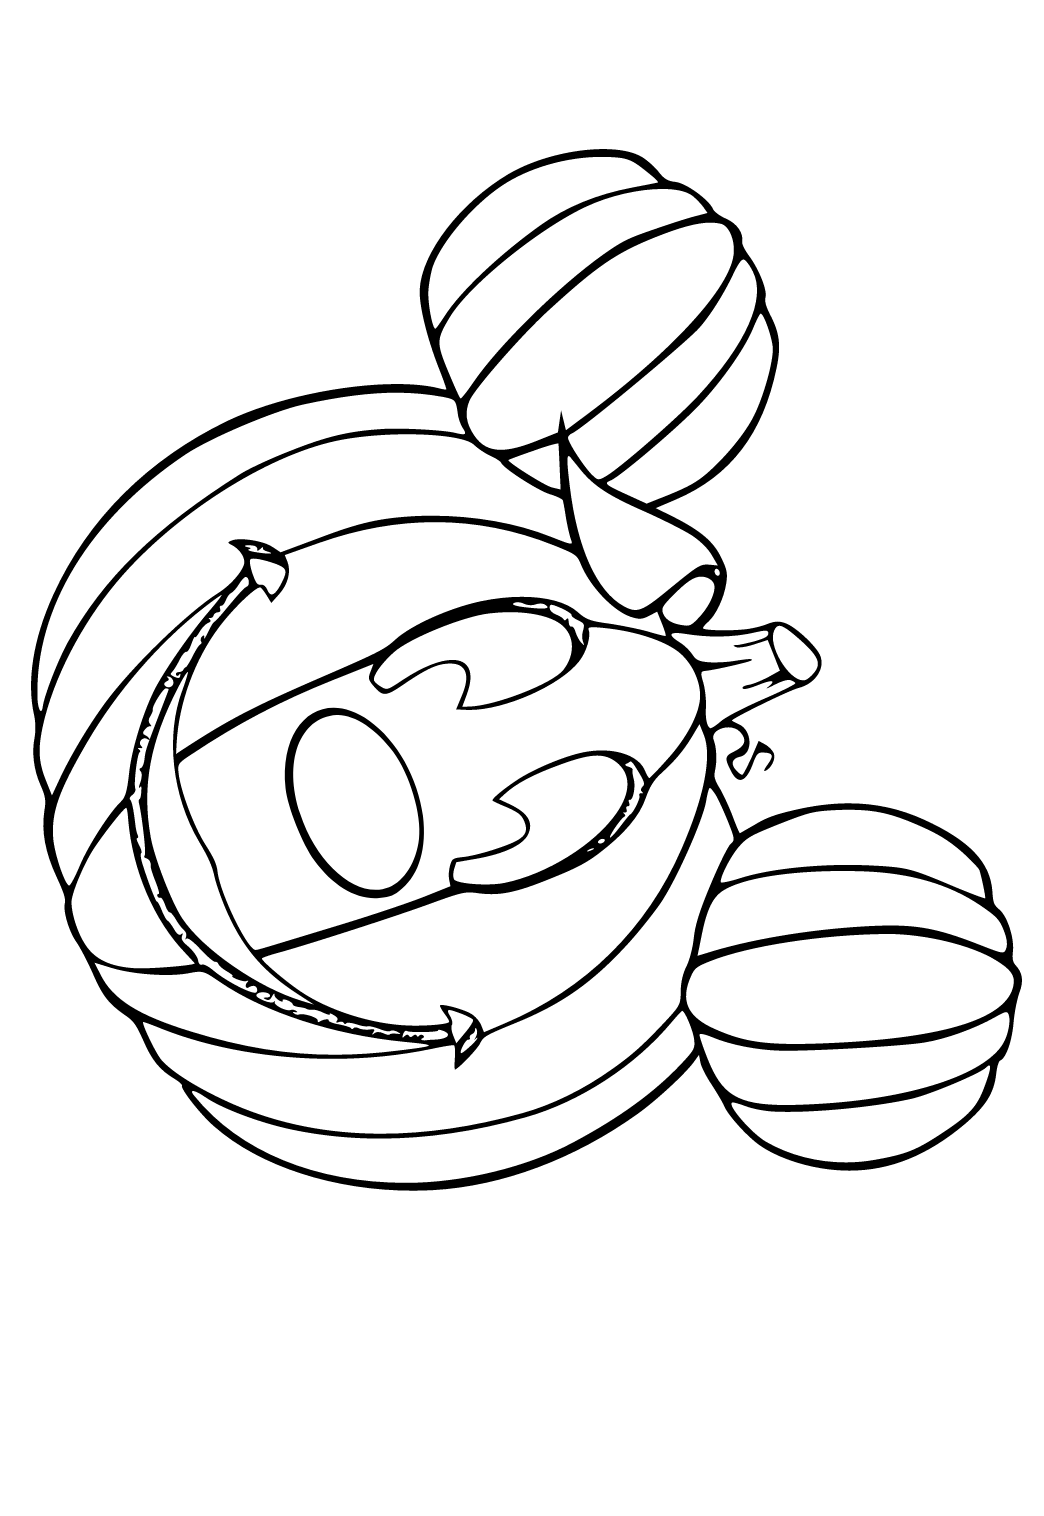 Free printable jack olantern funny coloring page for adults and kids